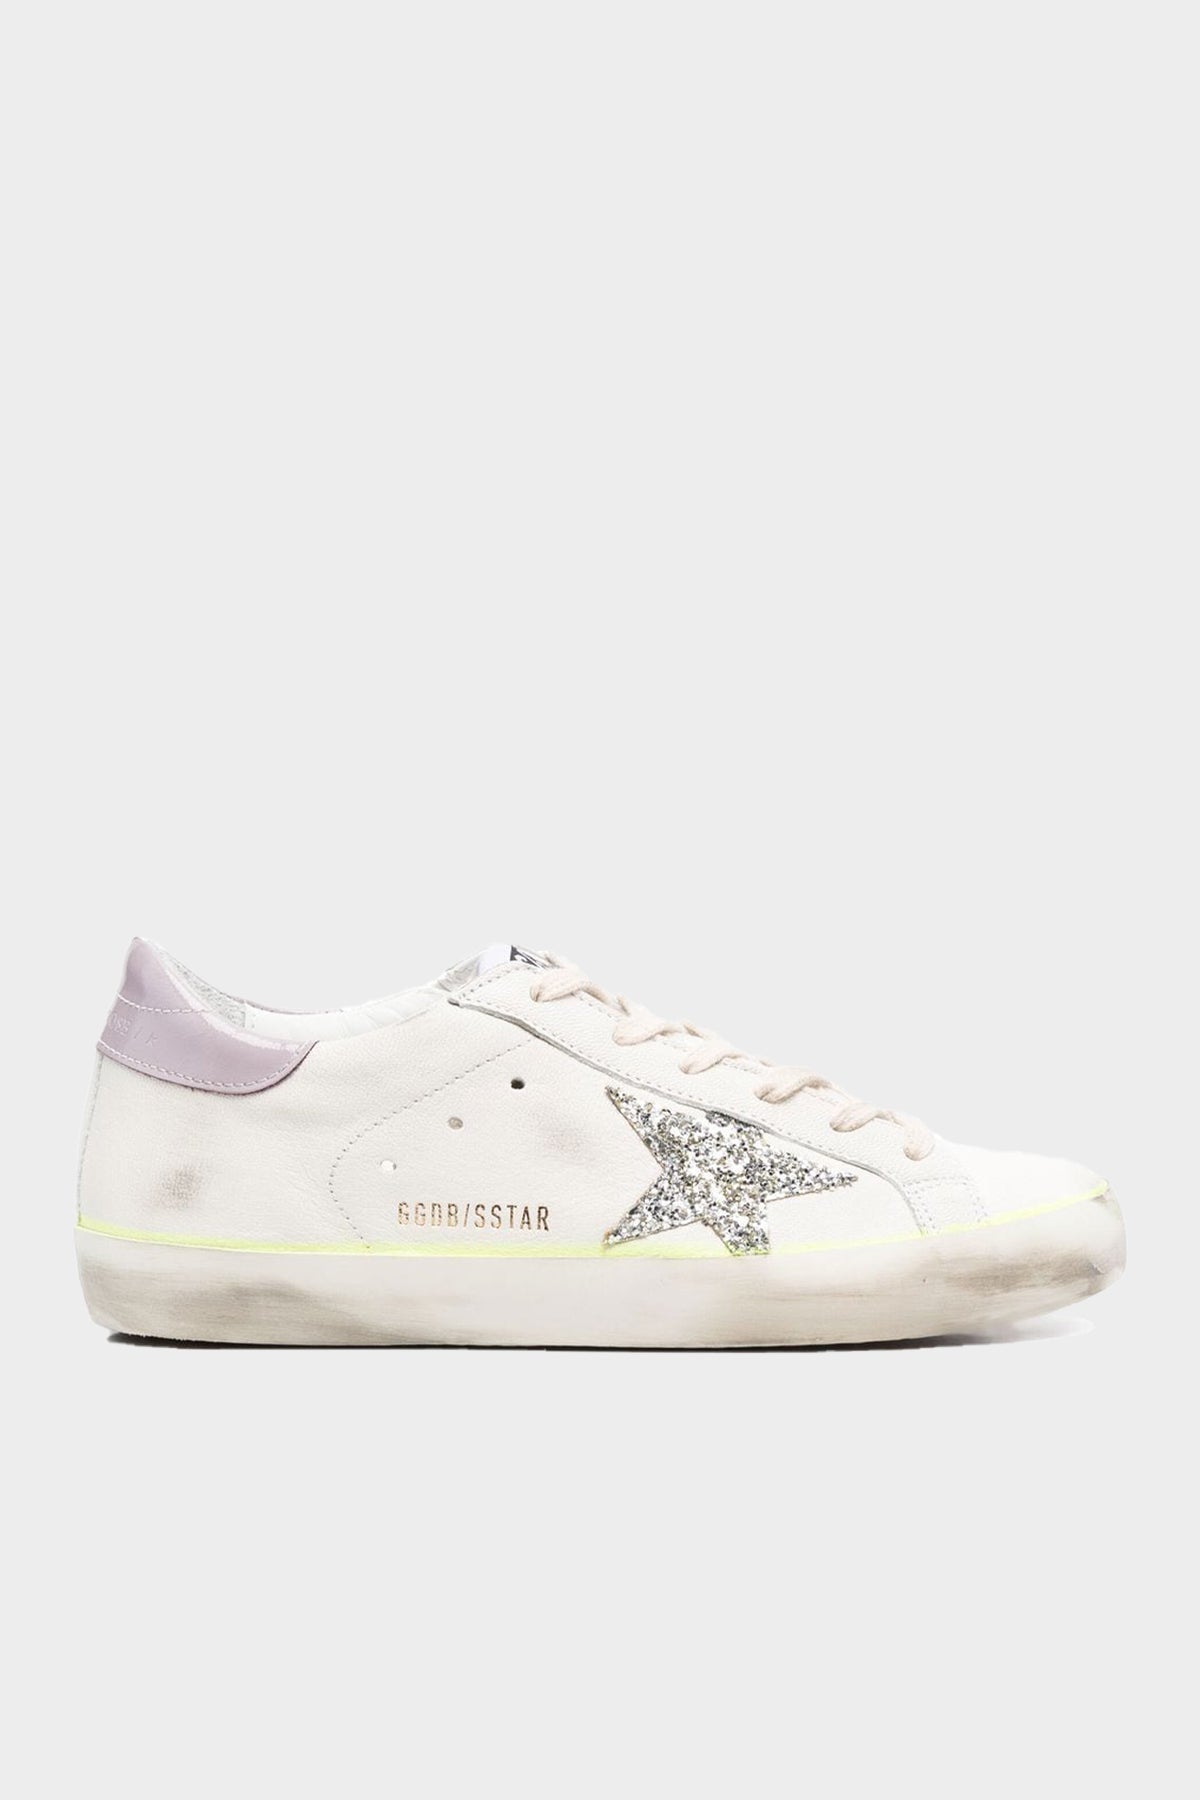 Super-Star Lilac Back and Silver Glitter Star Leather Sneaker - shop-olivia.com